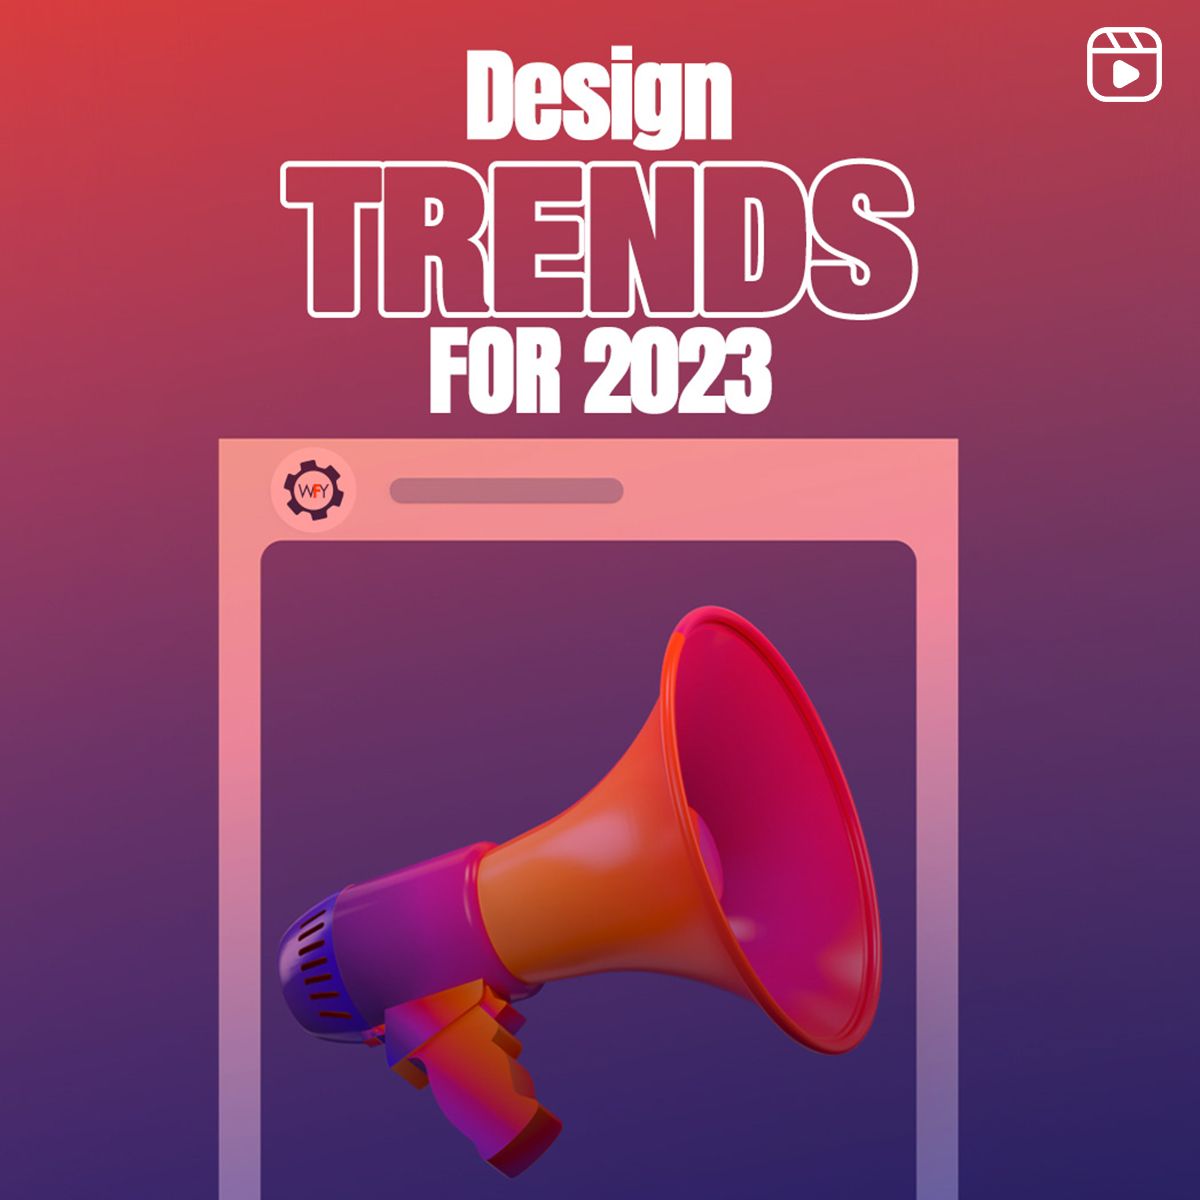 Design trends for 2023